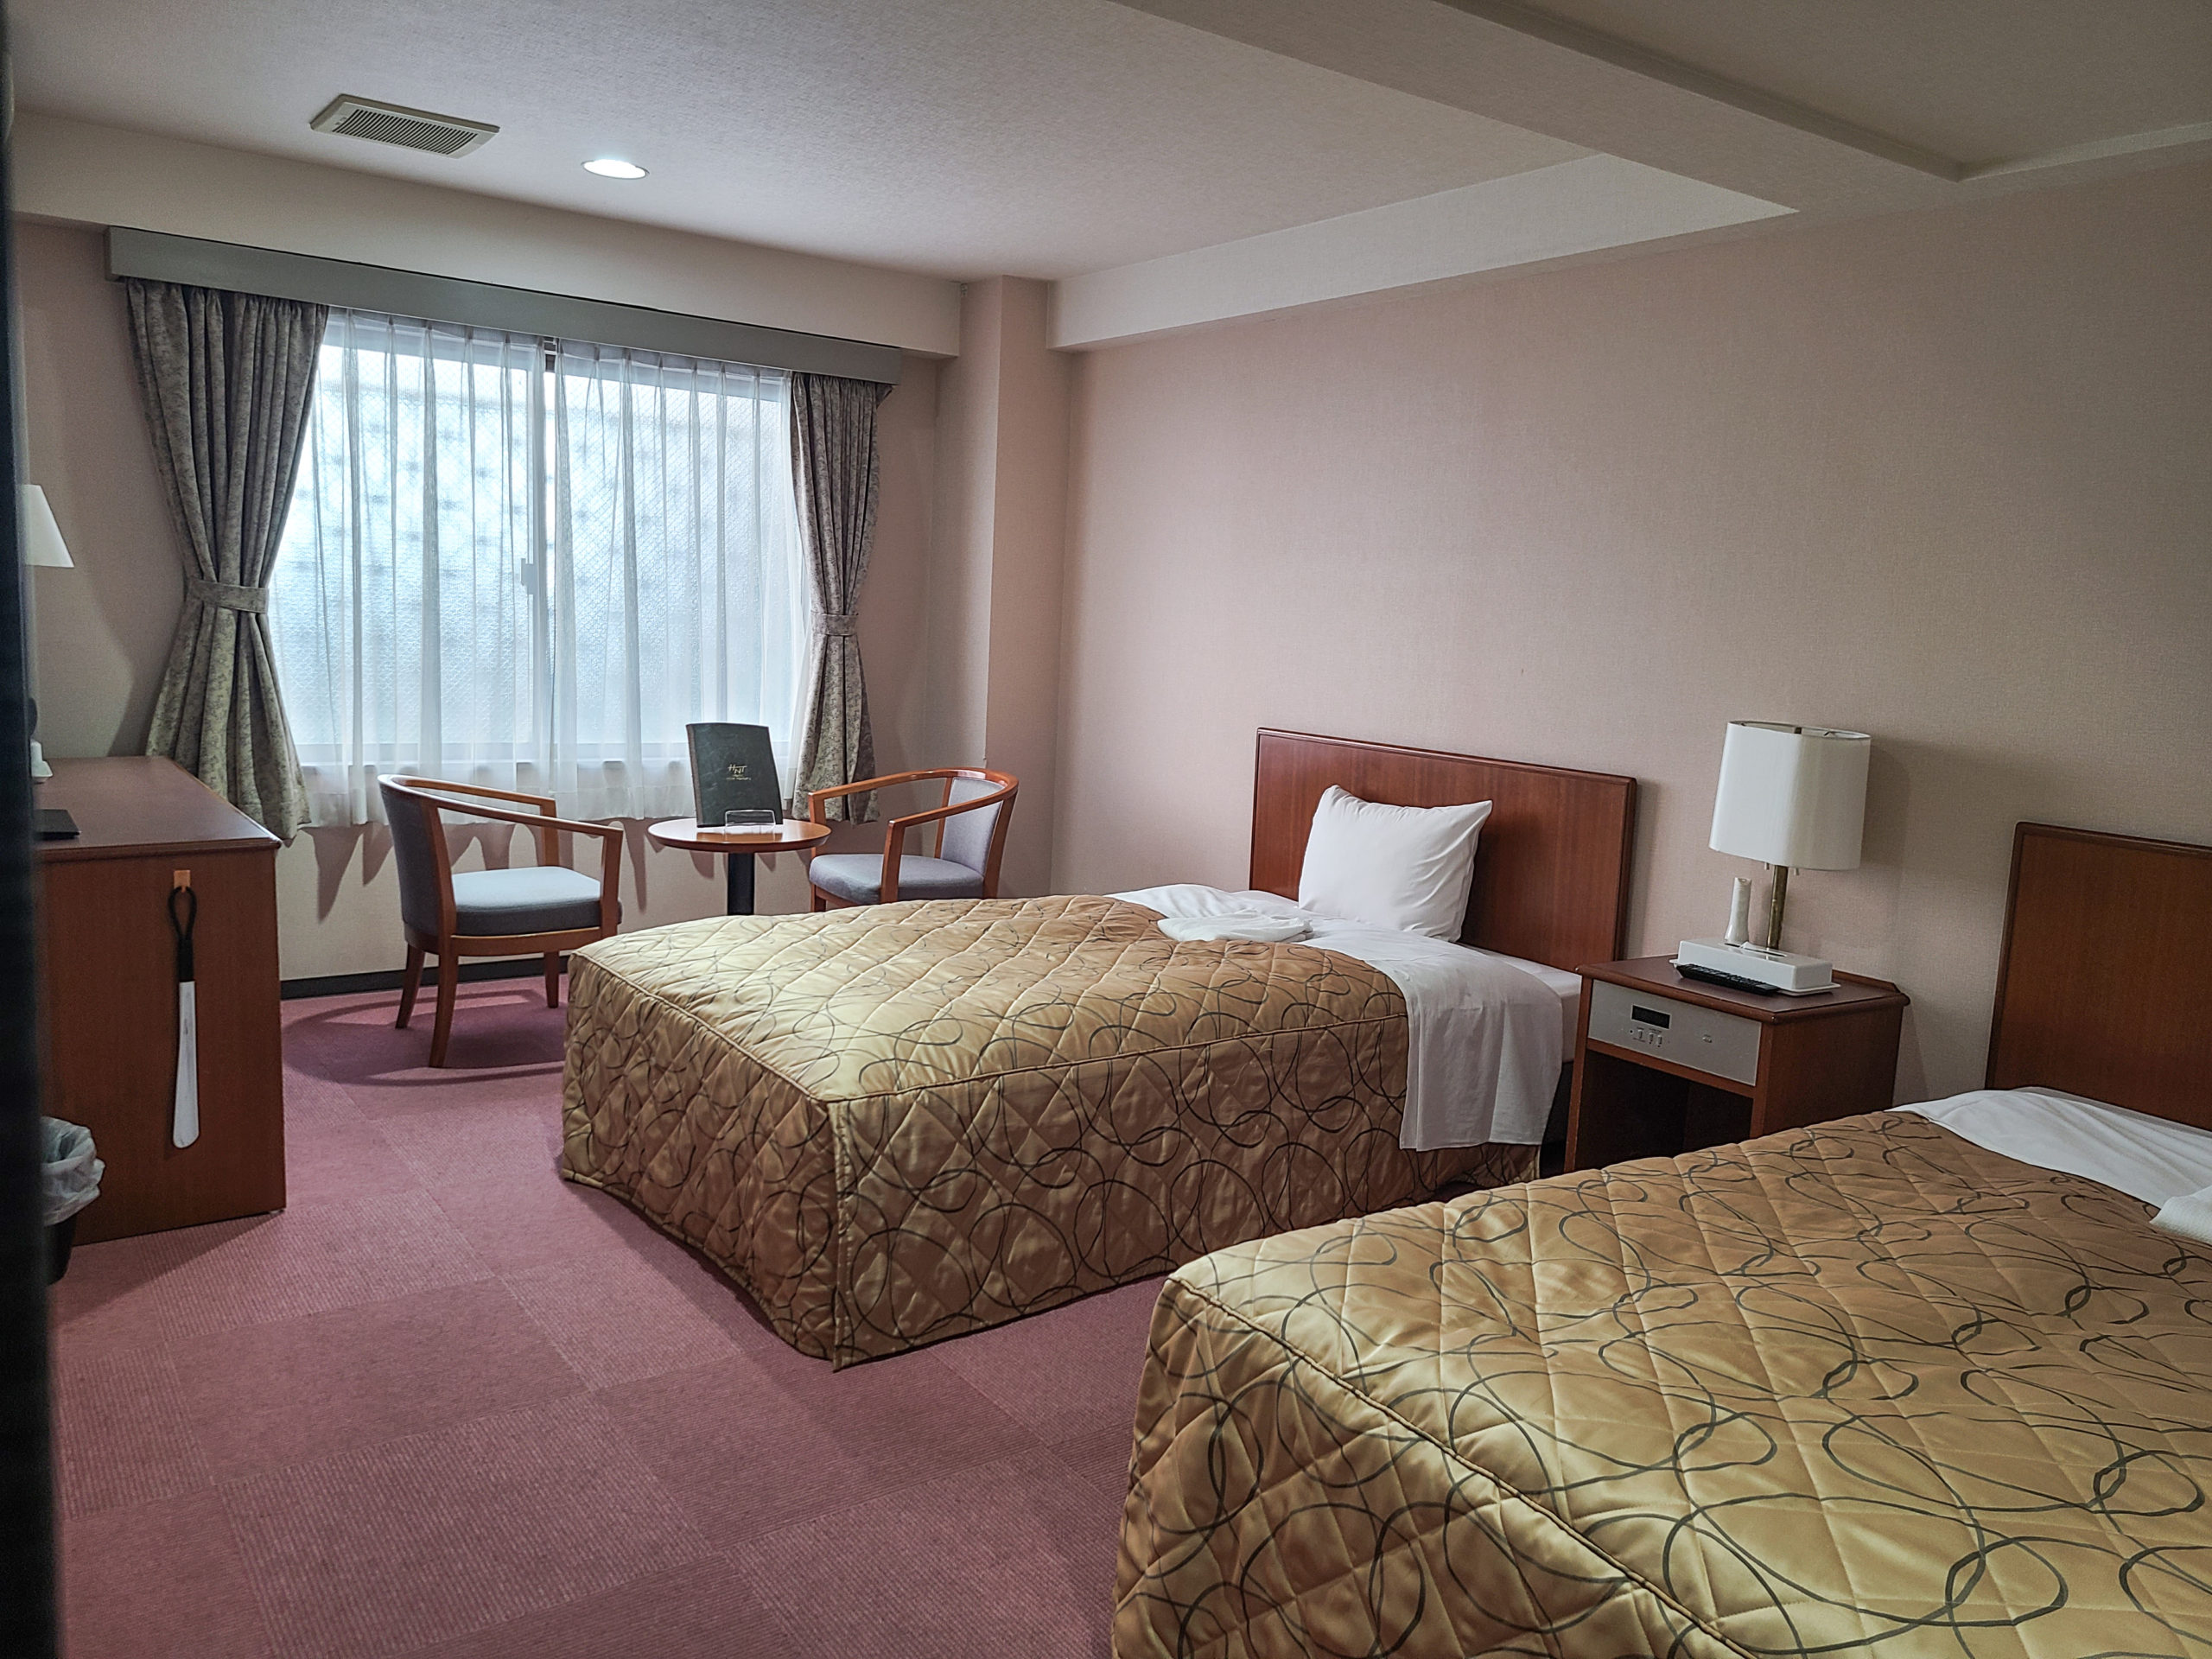 The rooms are clean and pleasant, available in single, semi-double, double, twin, and triple sizes. All rooms have a non-smoking policy which is strictly enforced. While only 5 minutes away from the station, the hotel is not on the main road so rooms are relatively quiet. 